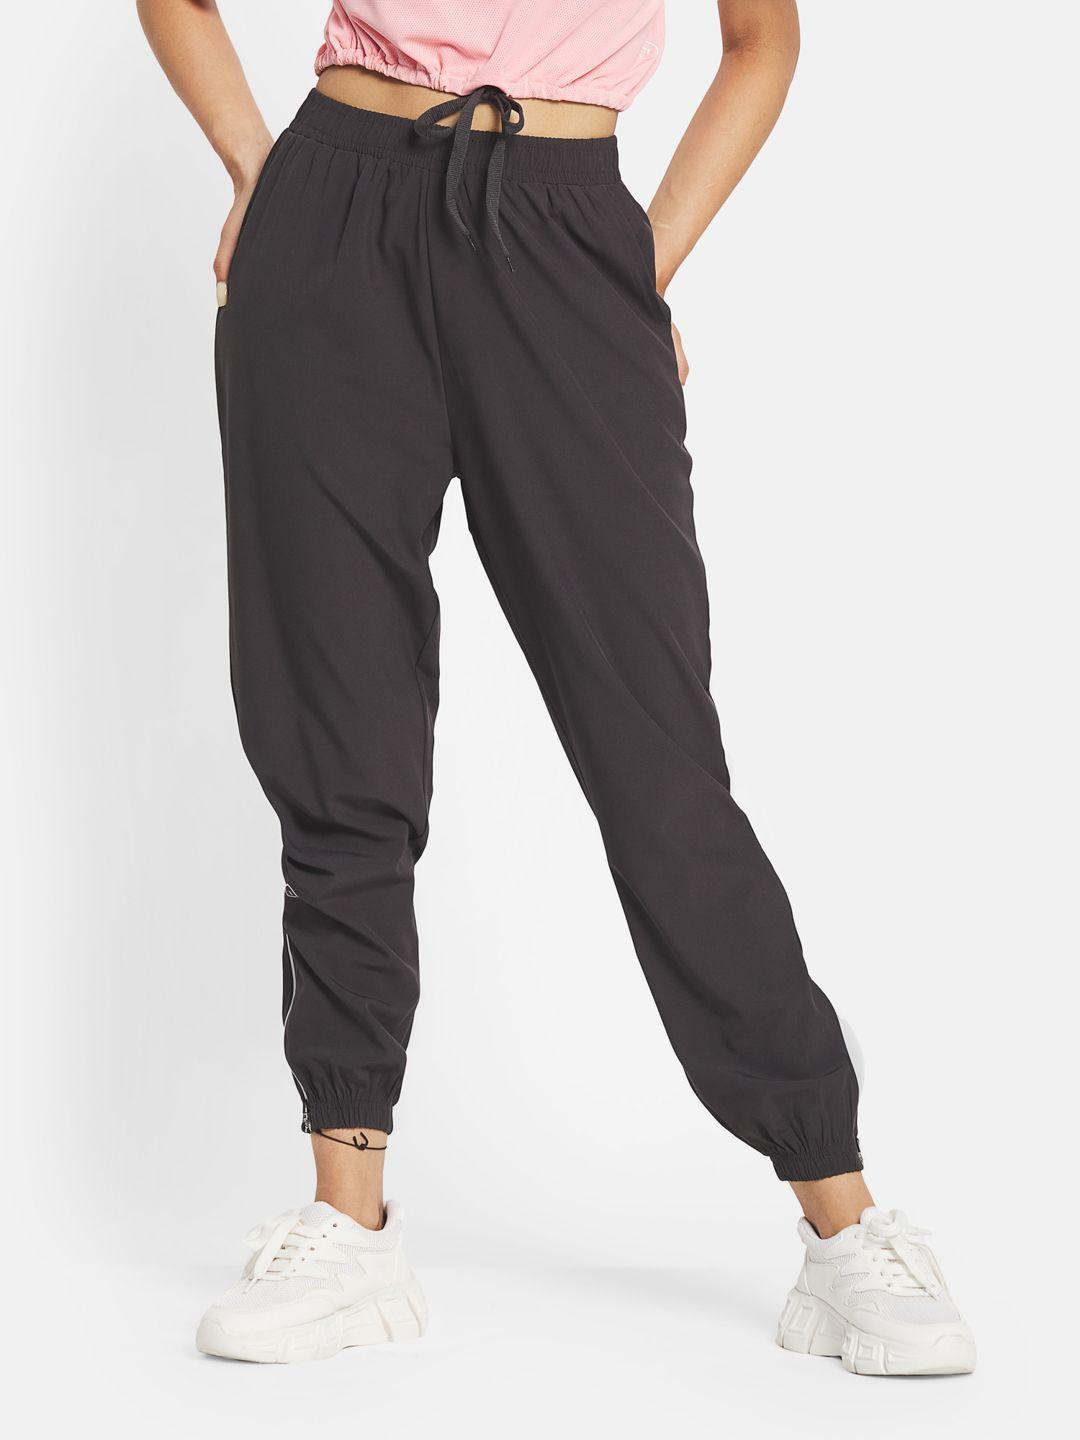 kica women charcoal grey breathable & moisture-wicking lightweight joggers